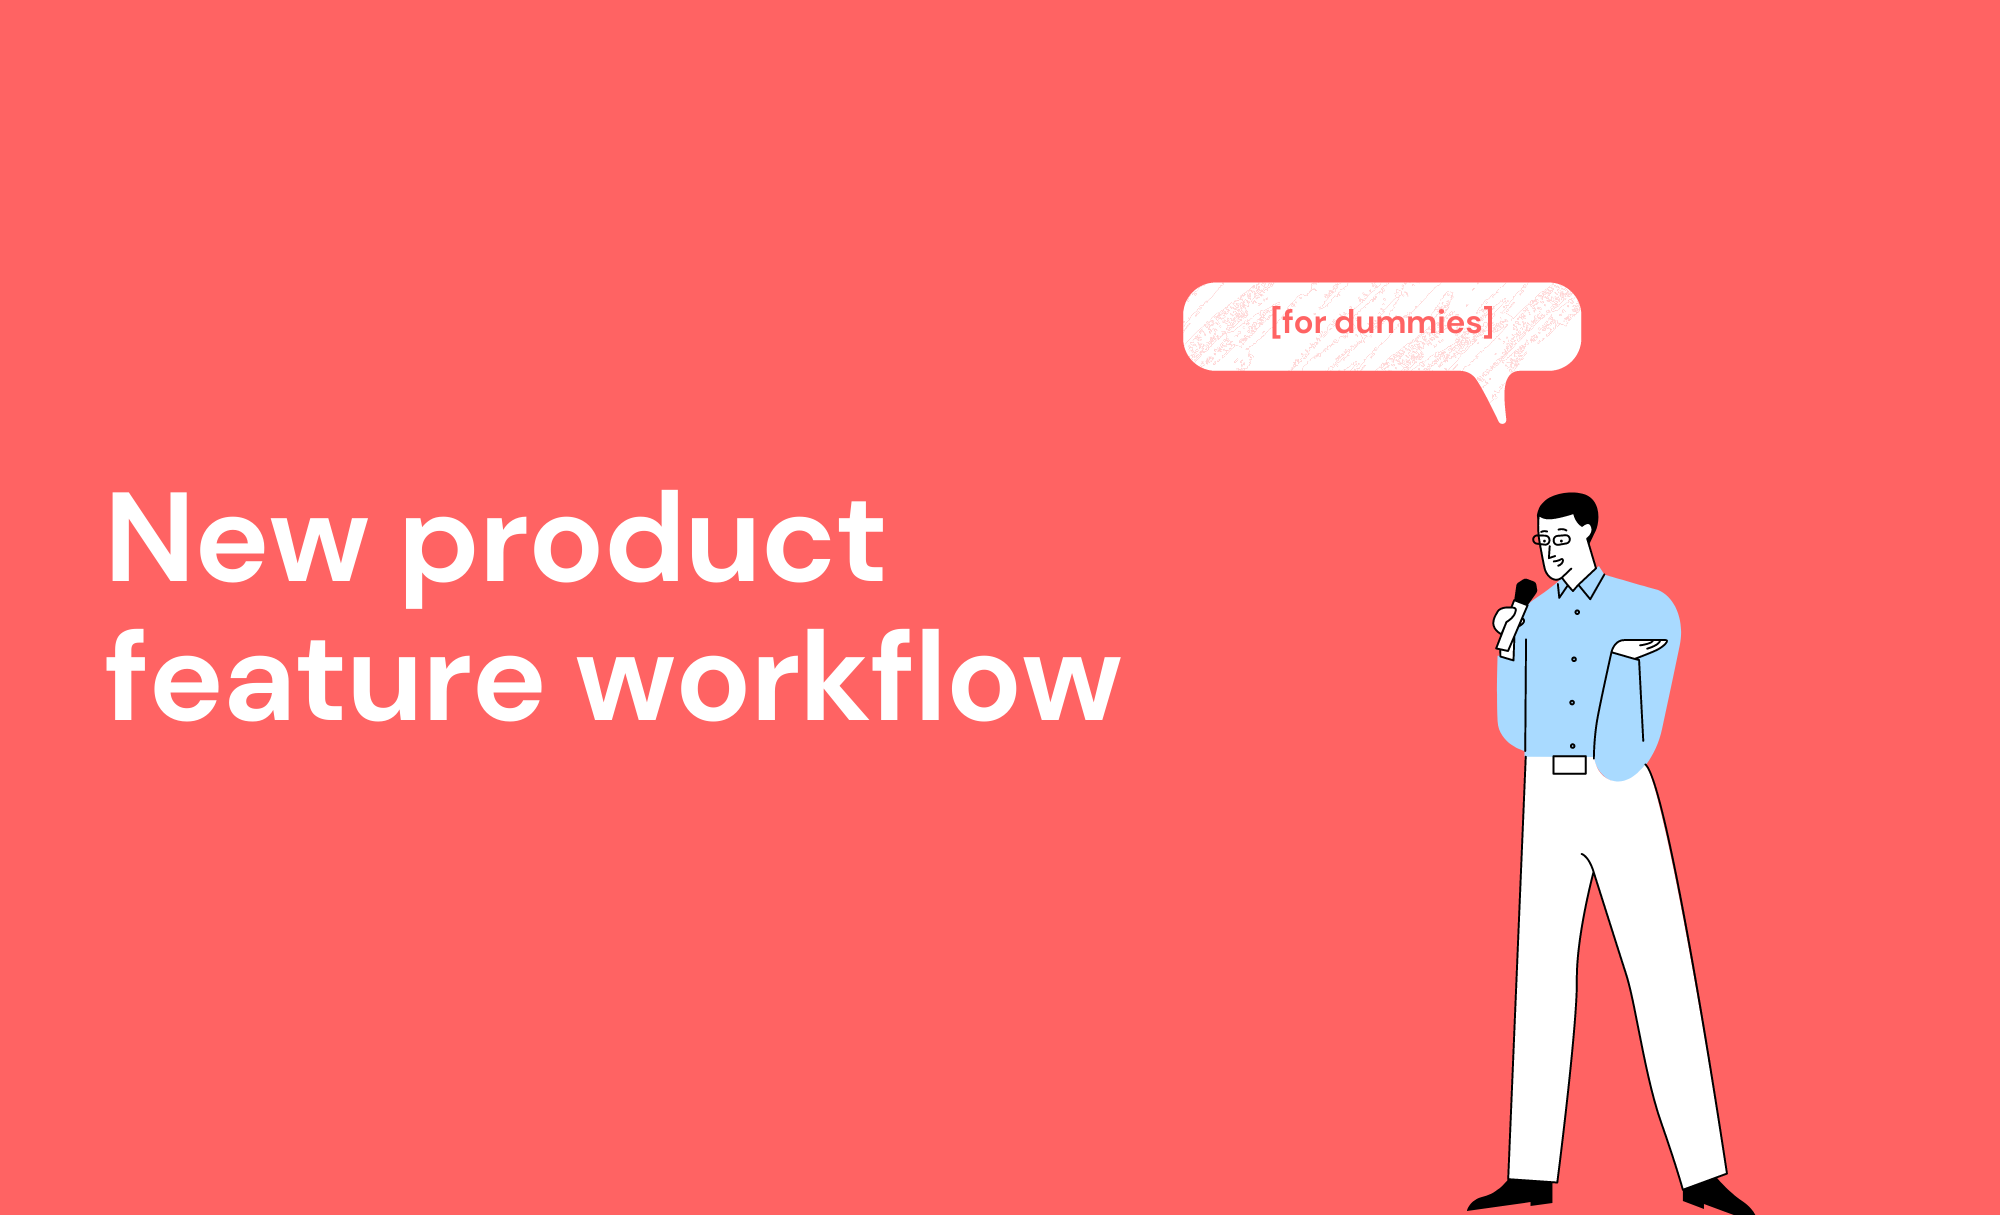 New product feature workflow [for dummies]